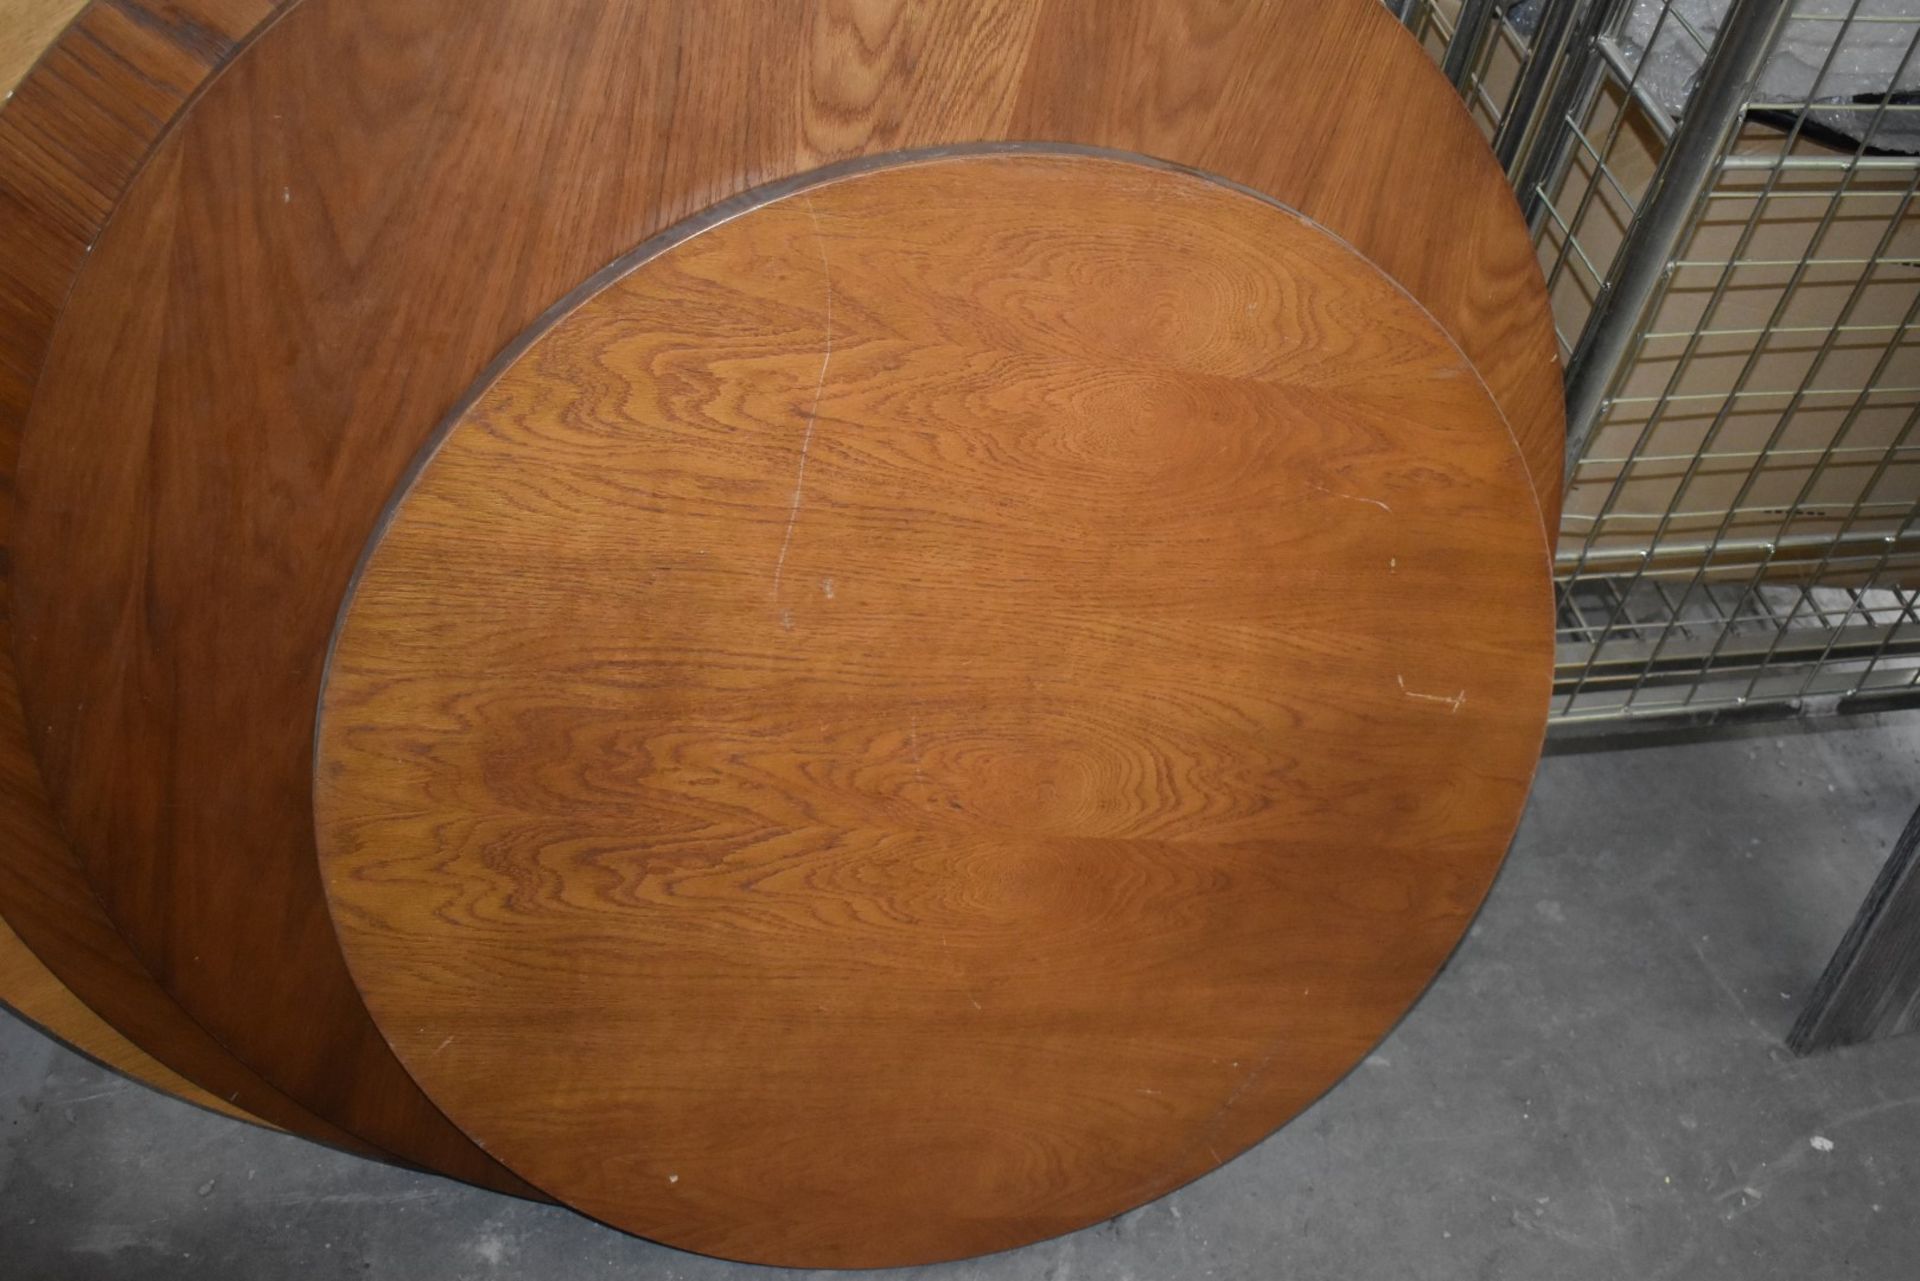 4 x Round Restaurant Dining Table Tops - Sizes Included 100cm, 100cm, 90cm and 75cm - Image 7 of 8